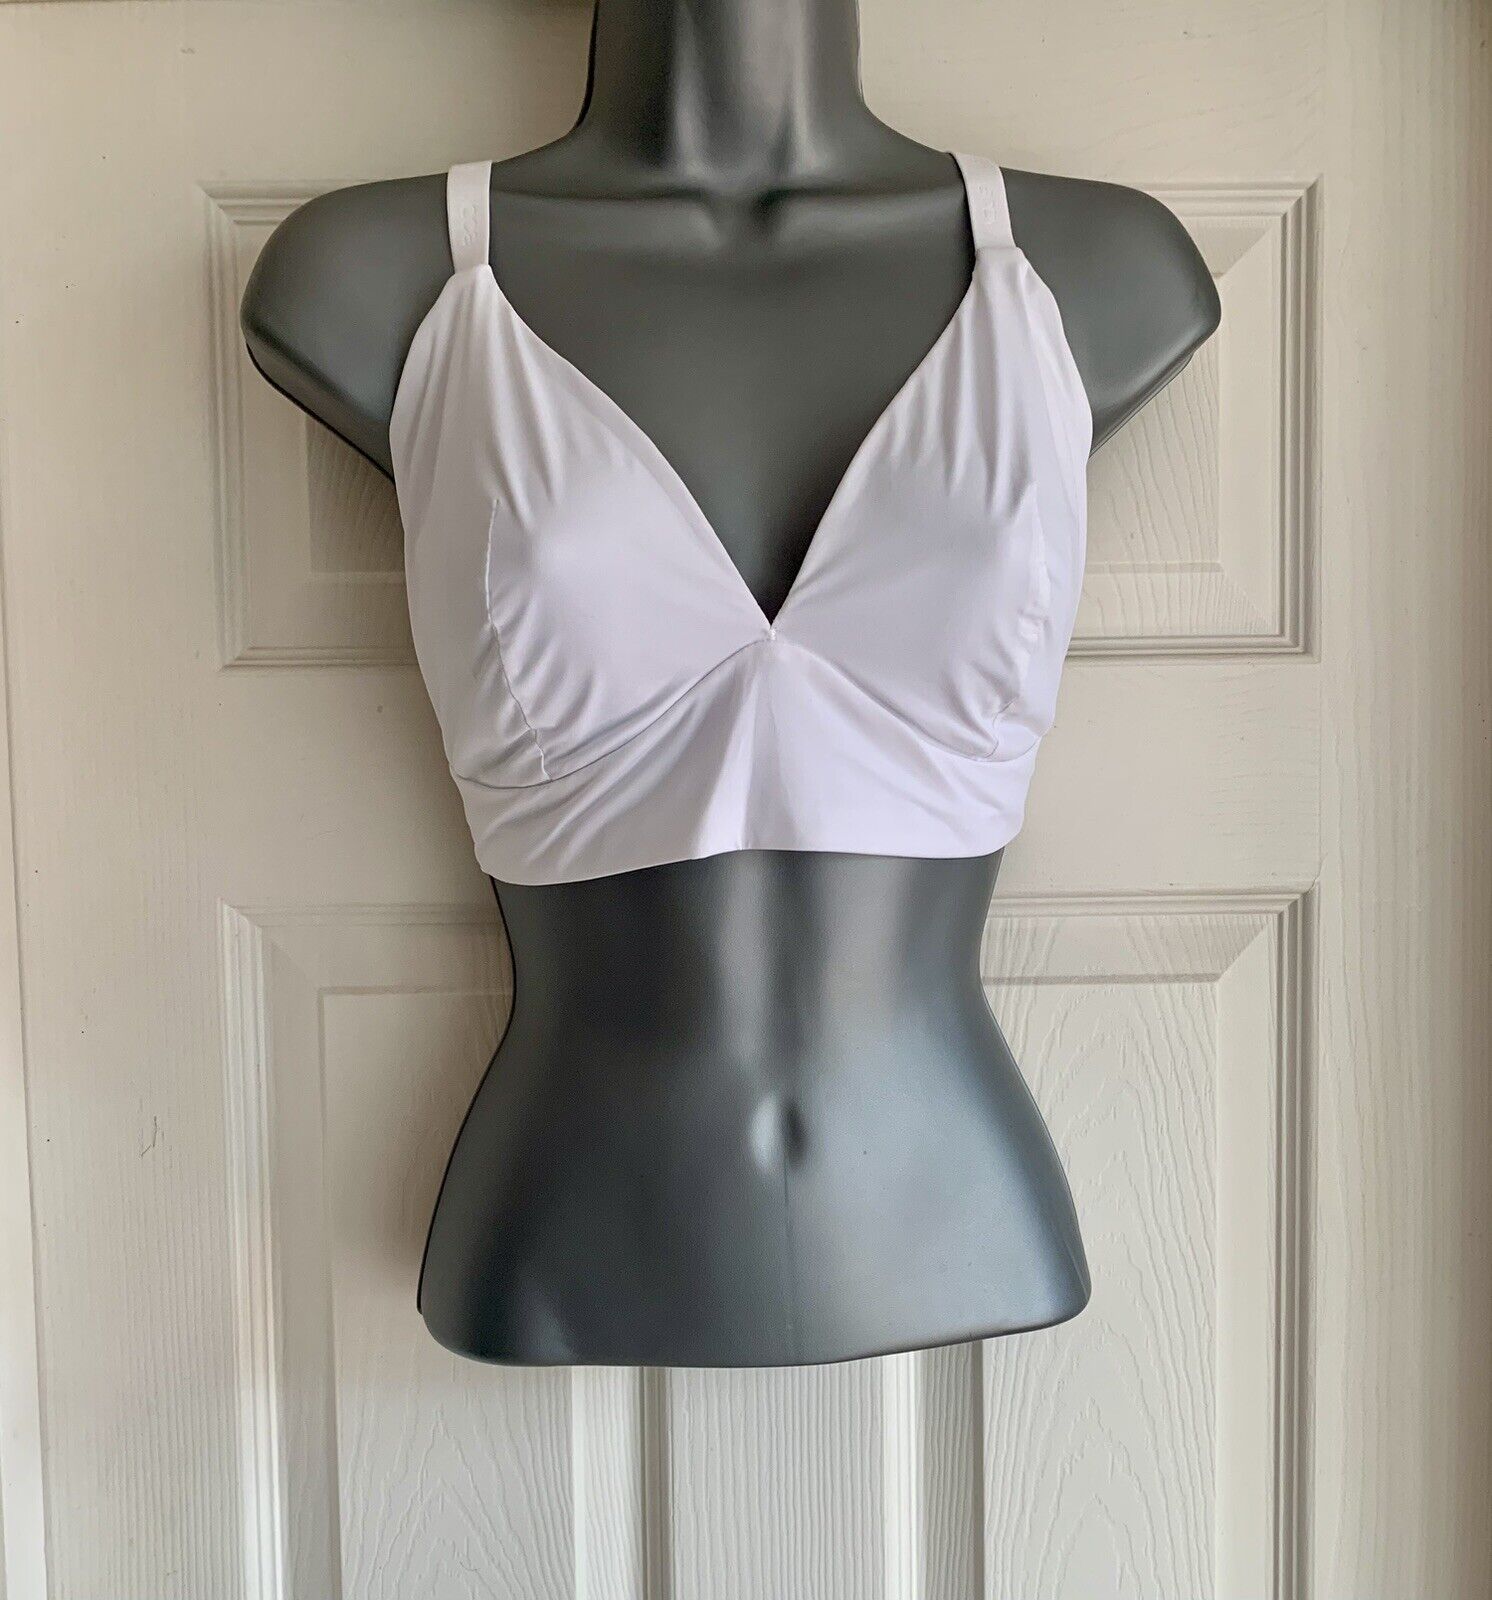 EX M*S White Body Smoothing Longline Non Wired Bralette in Sizes